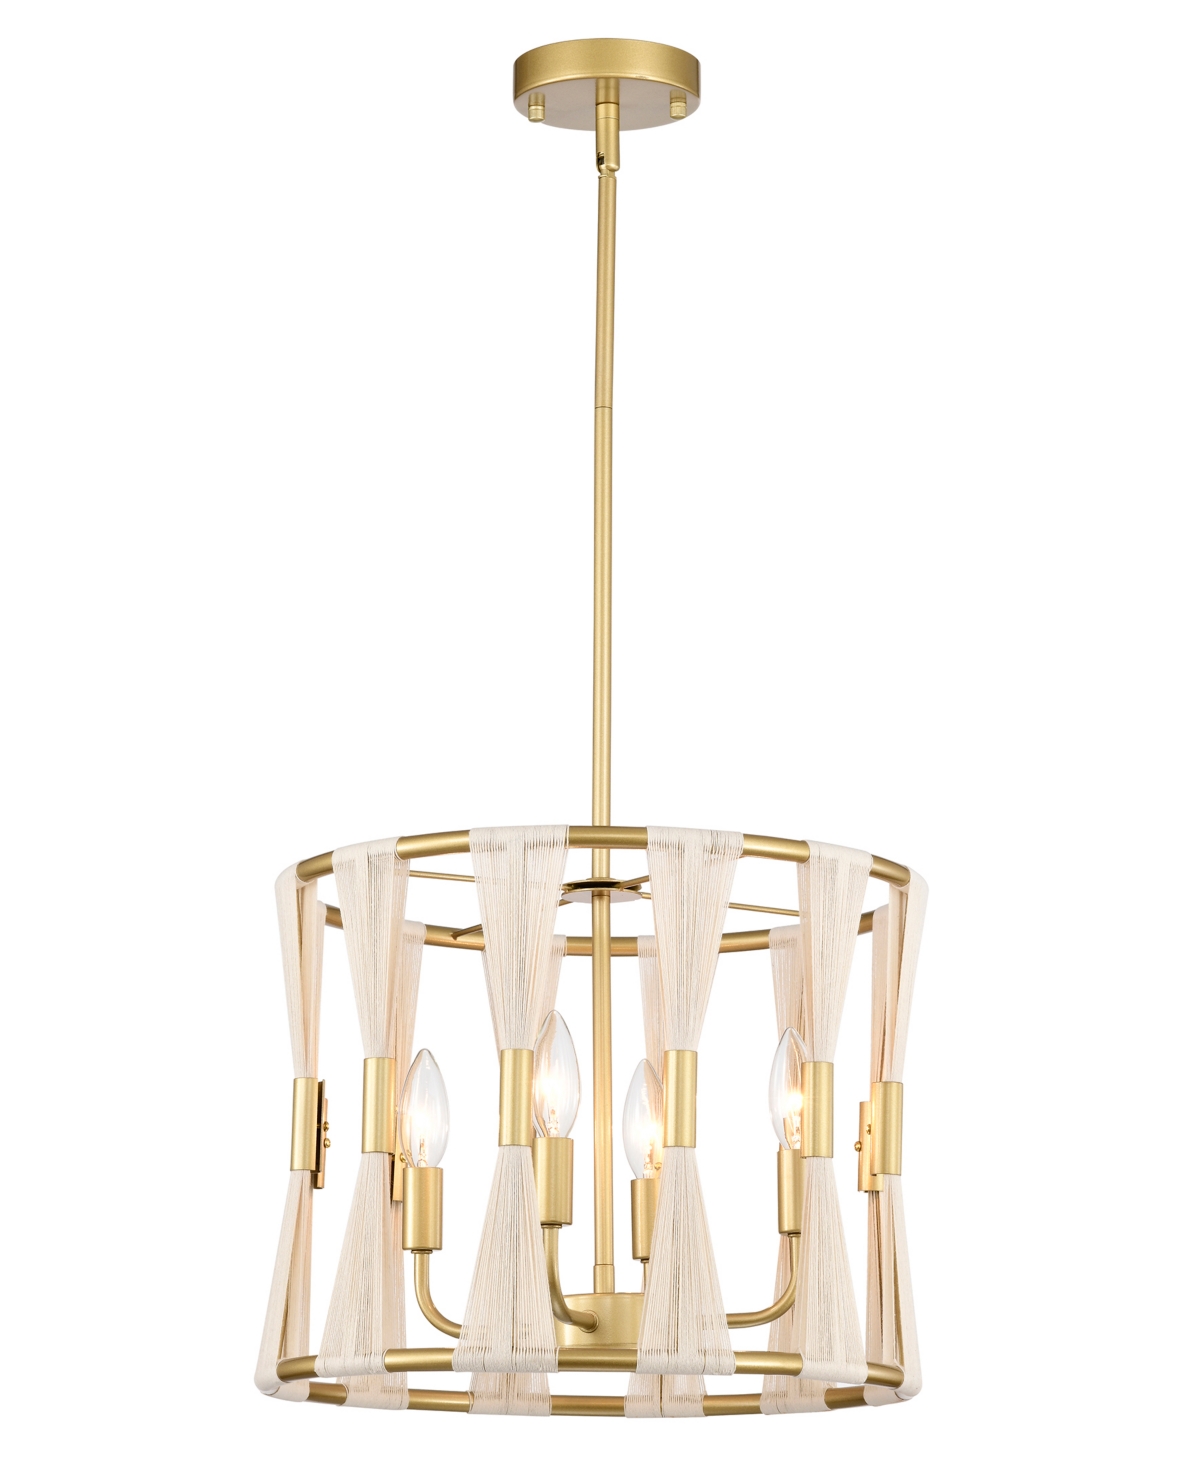 Home Accessories Adeline 16" 4-light Indoor Finish Chandelier With Light Kit In Brass